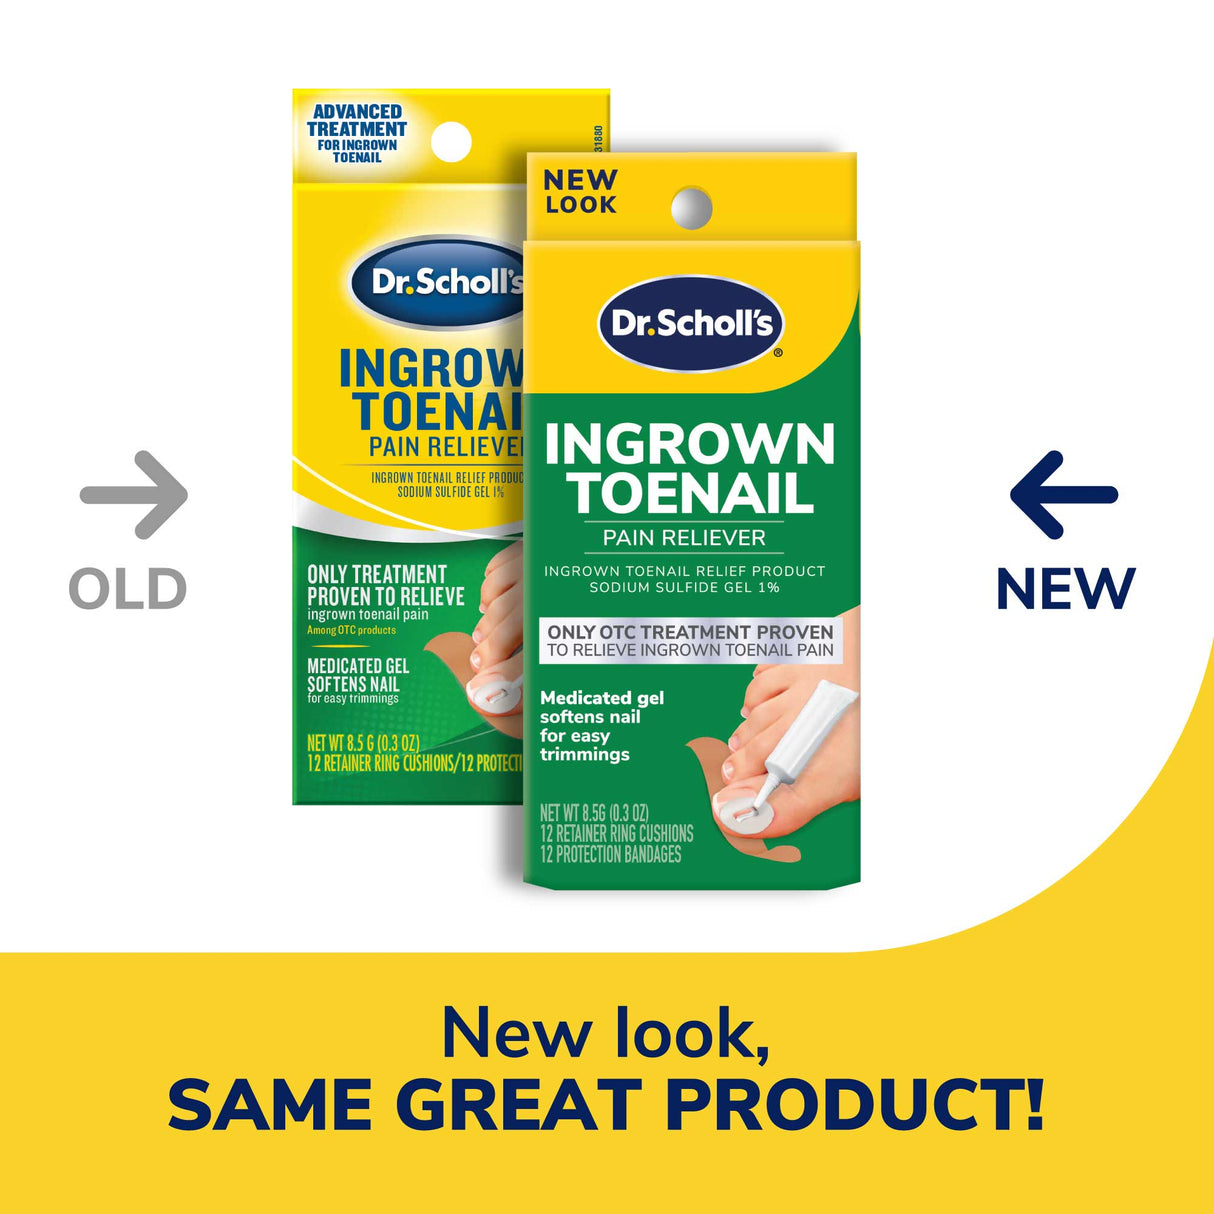 image of old and new packaging of the ingrown toenail reliever